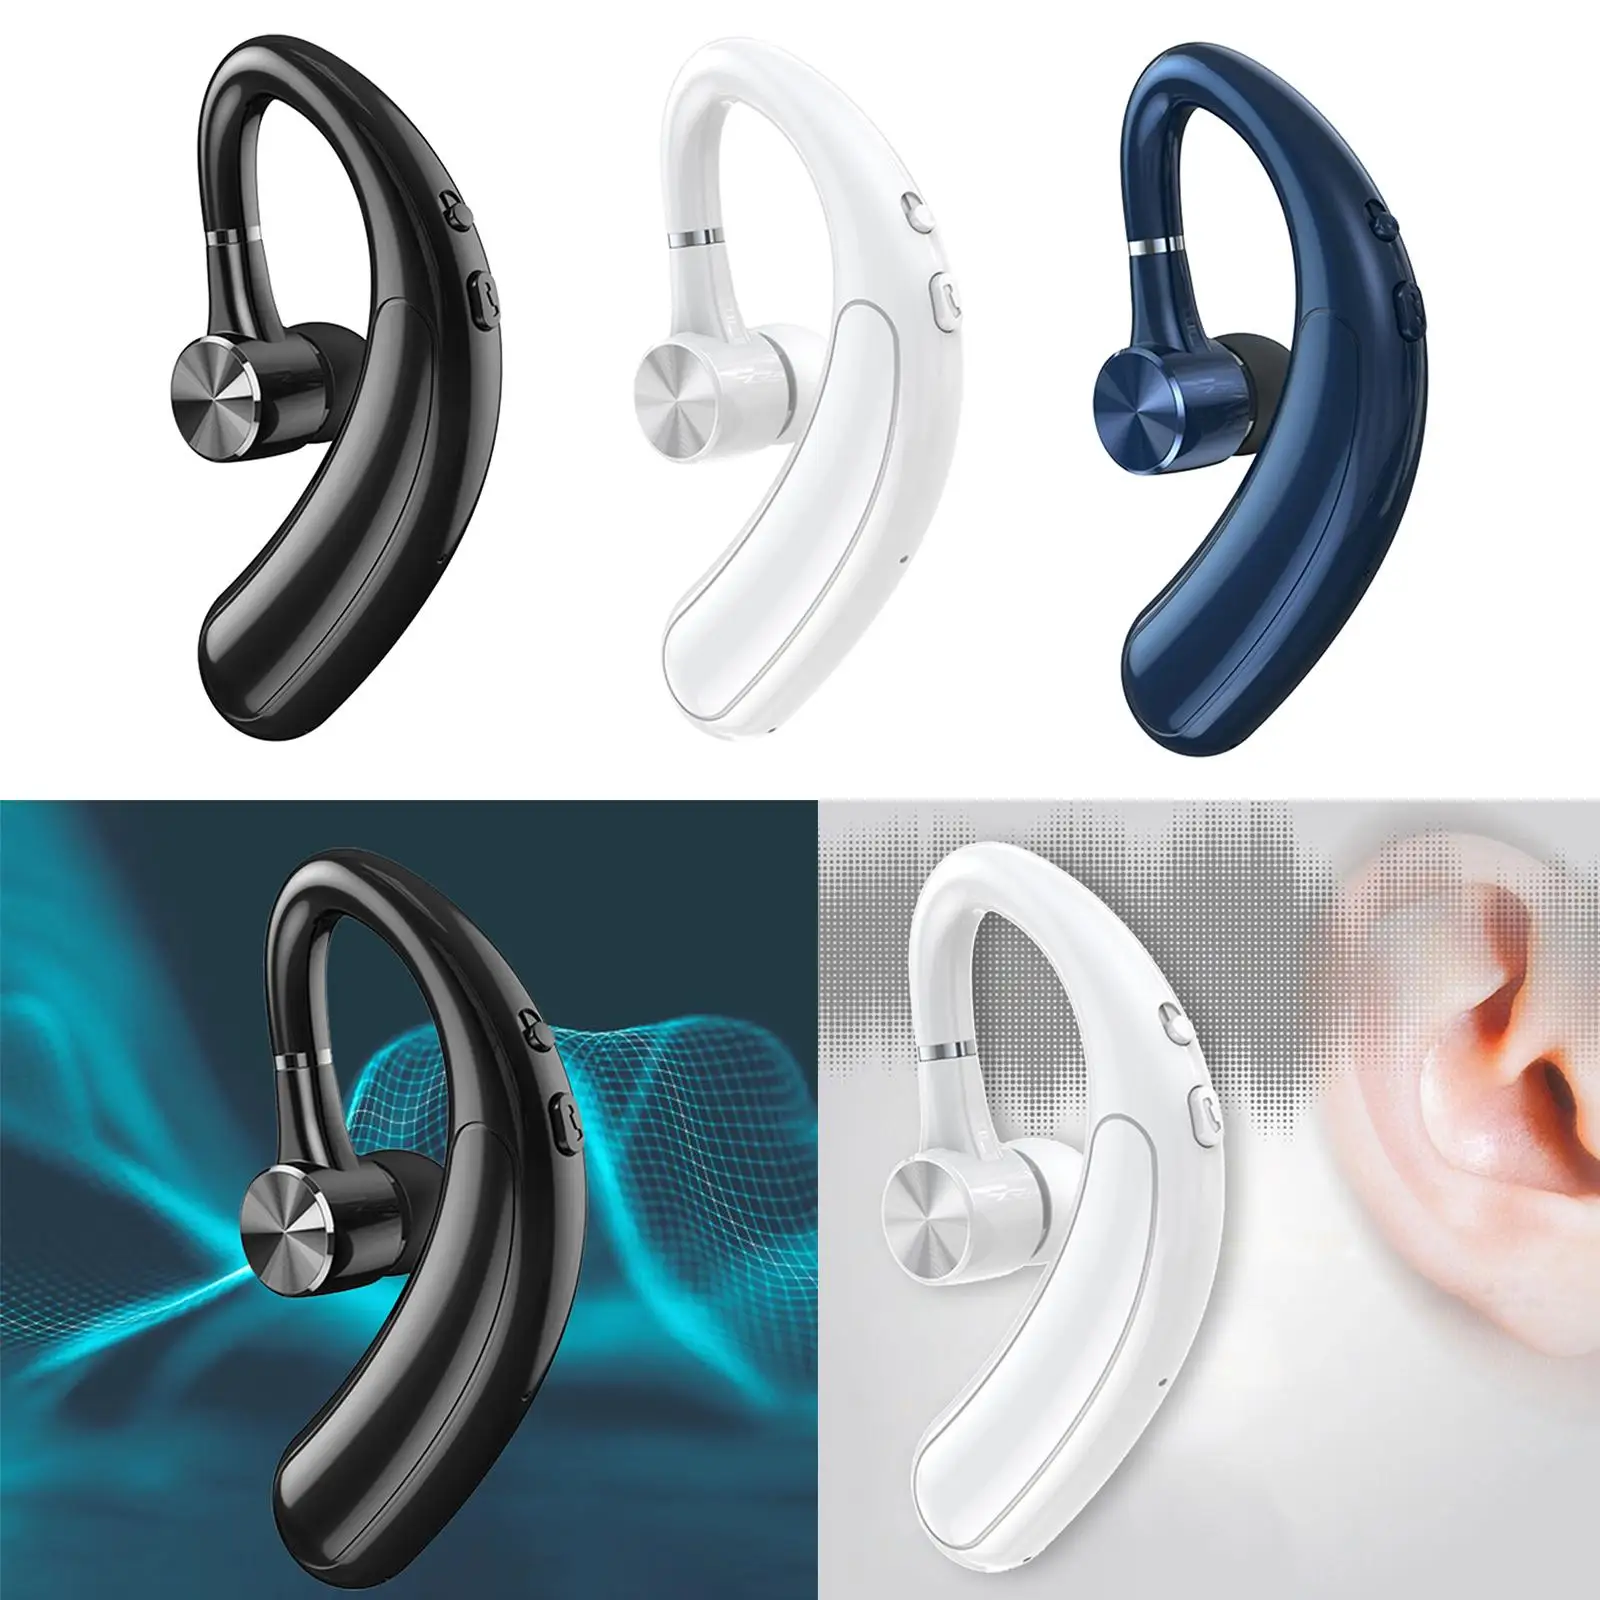 Ear Hook Bluetooth Headset Business Earphones for Sports Exercise Computer